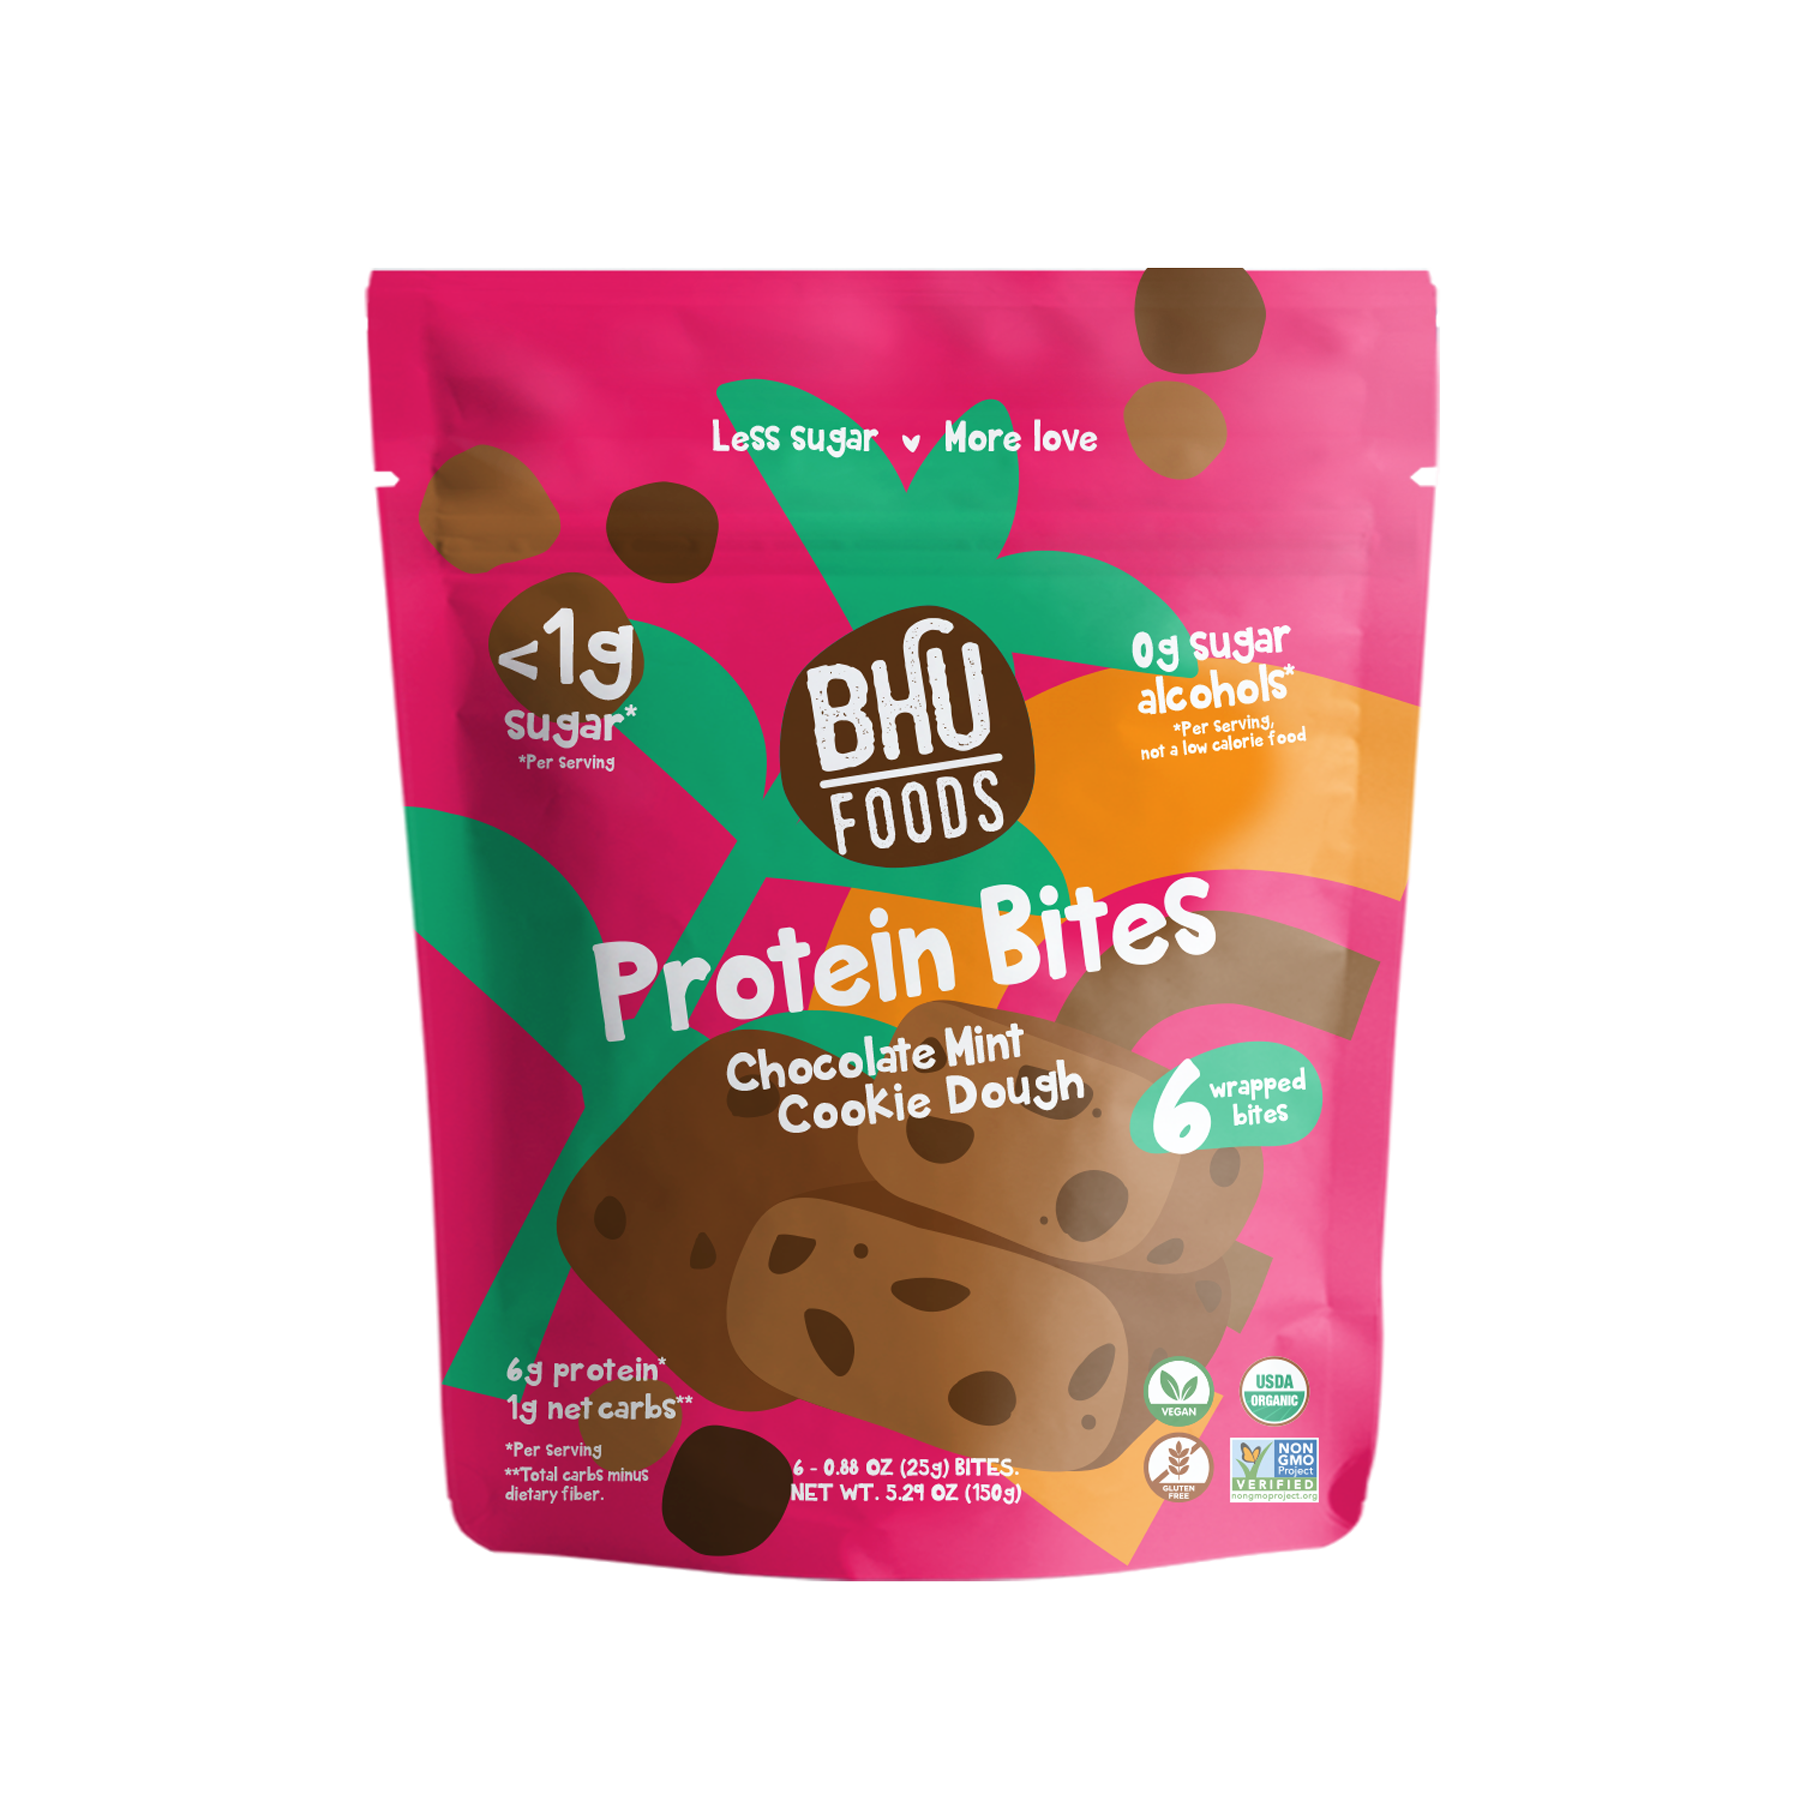 BHU Foods Protein Bites - Chocolate Mint Cookie Dough 6 innerpacks per case 5.3 oz